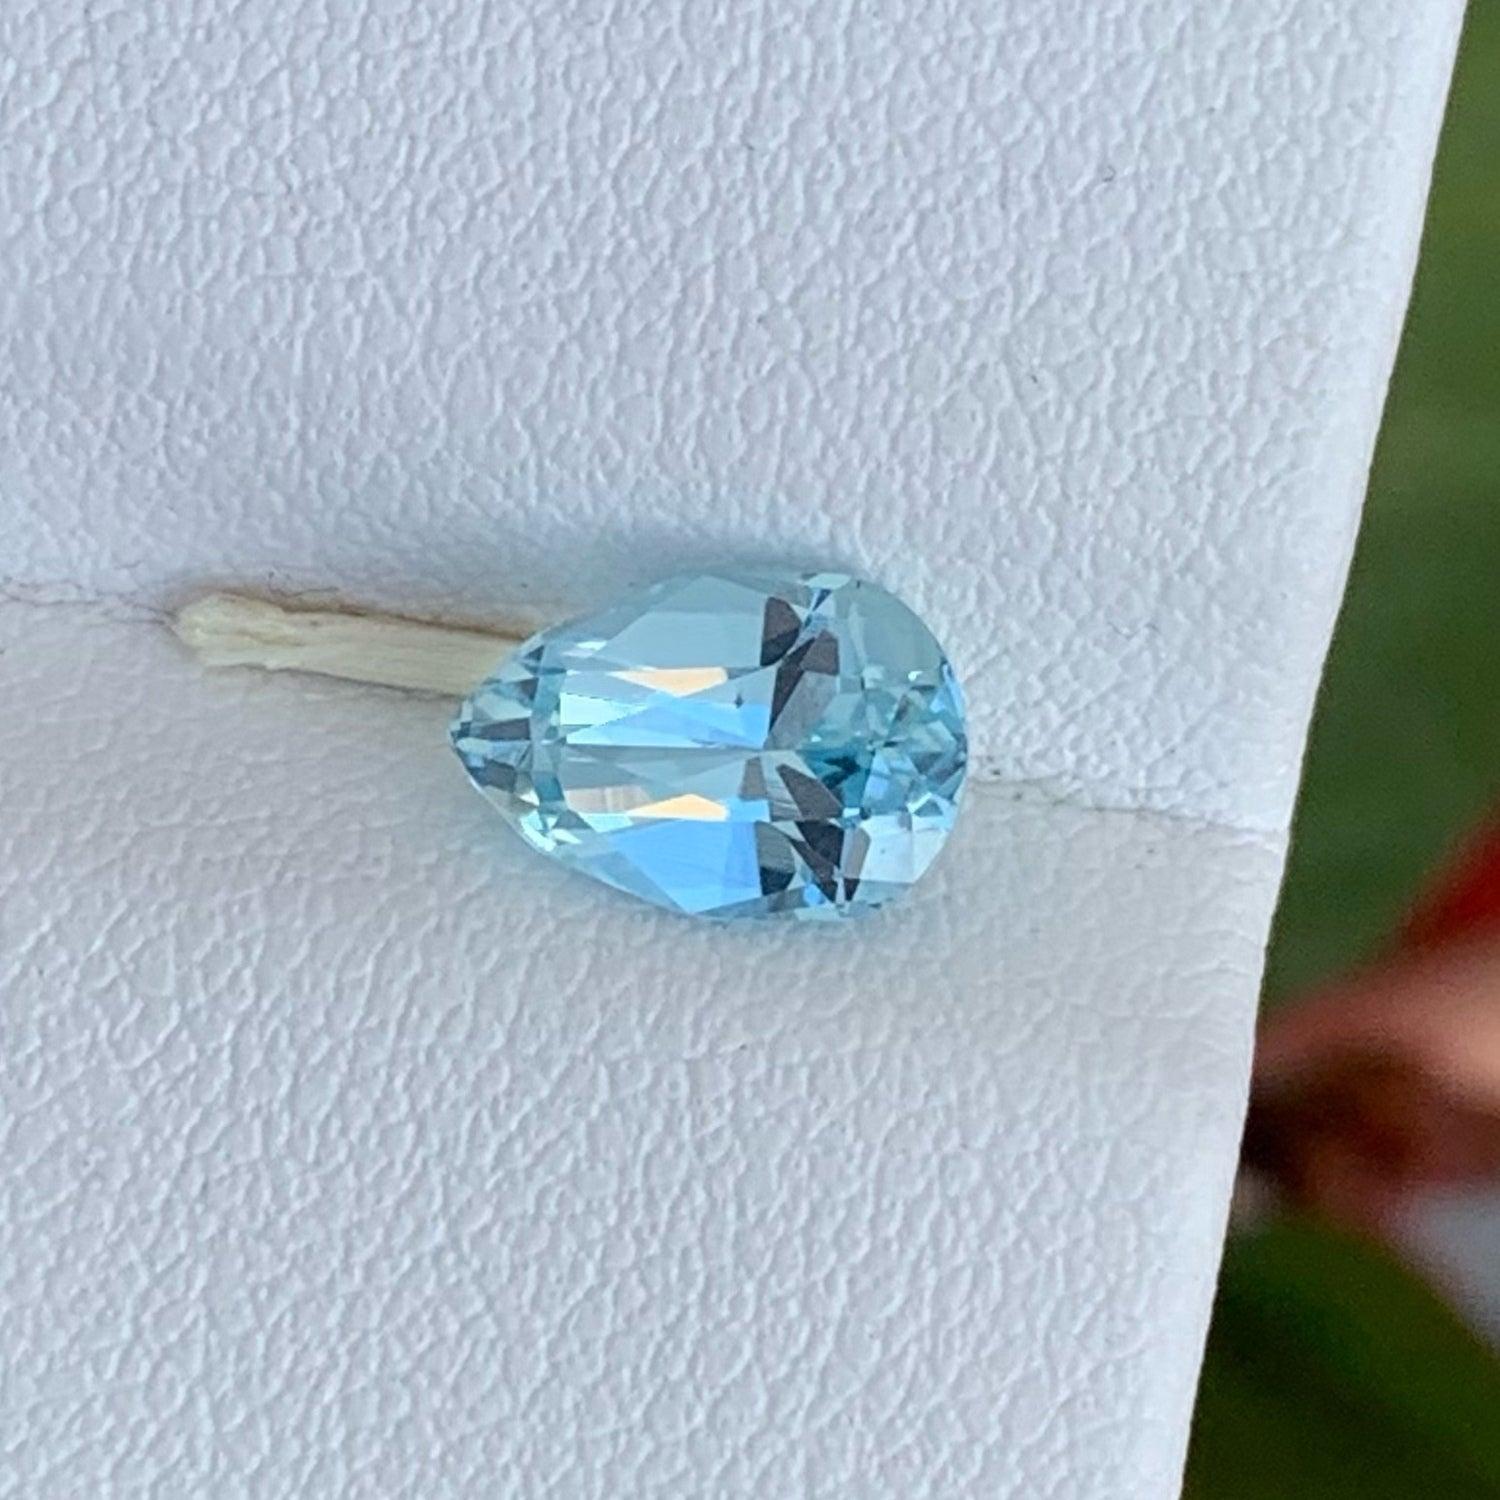 Exceptional Natural Aquamarine Stone, available for sale at wholesale price natural high quality 1.35 Carats Loupe Clean Clarity Loose Aquamarine from Pakistan.

Product Information:
GEMSTONE NAME: Exceptional Natural Aquamarine Stone
WEIGHT: 1.35